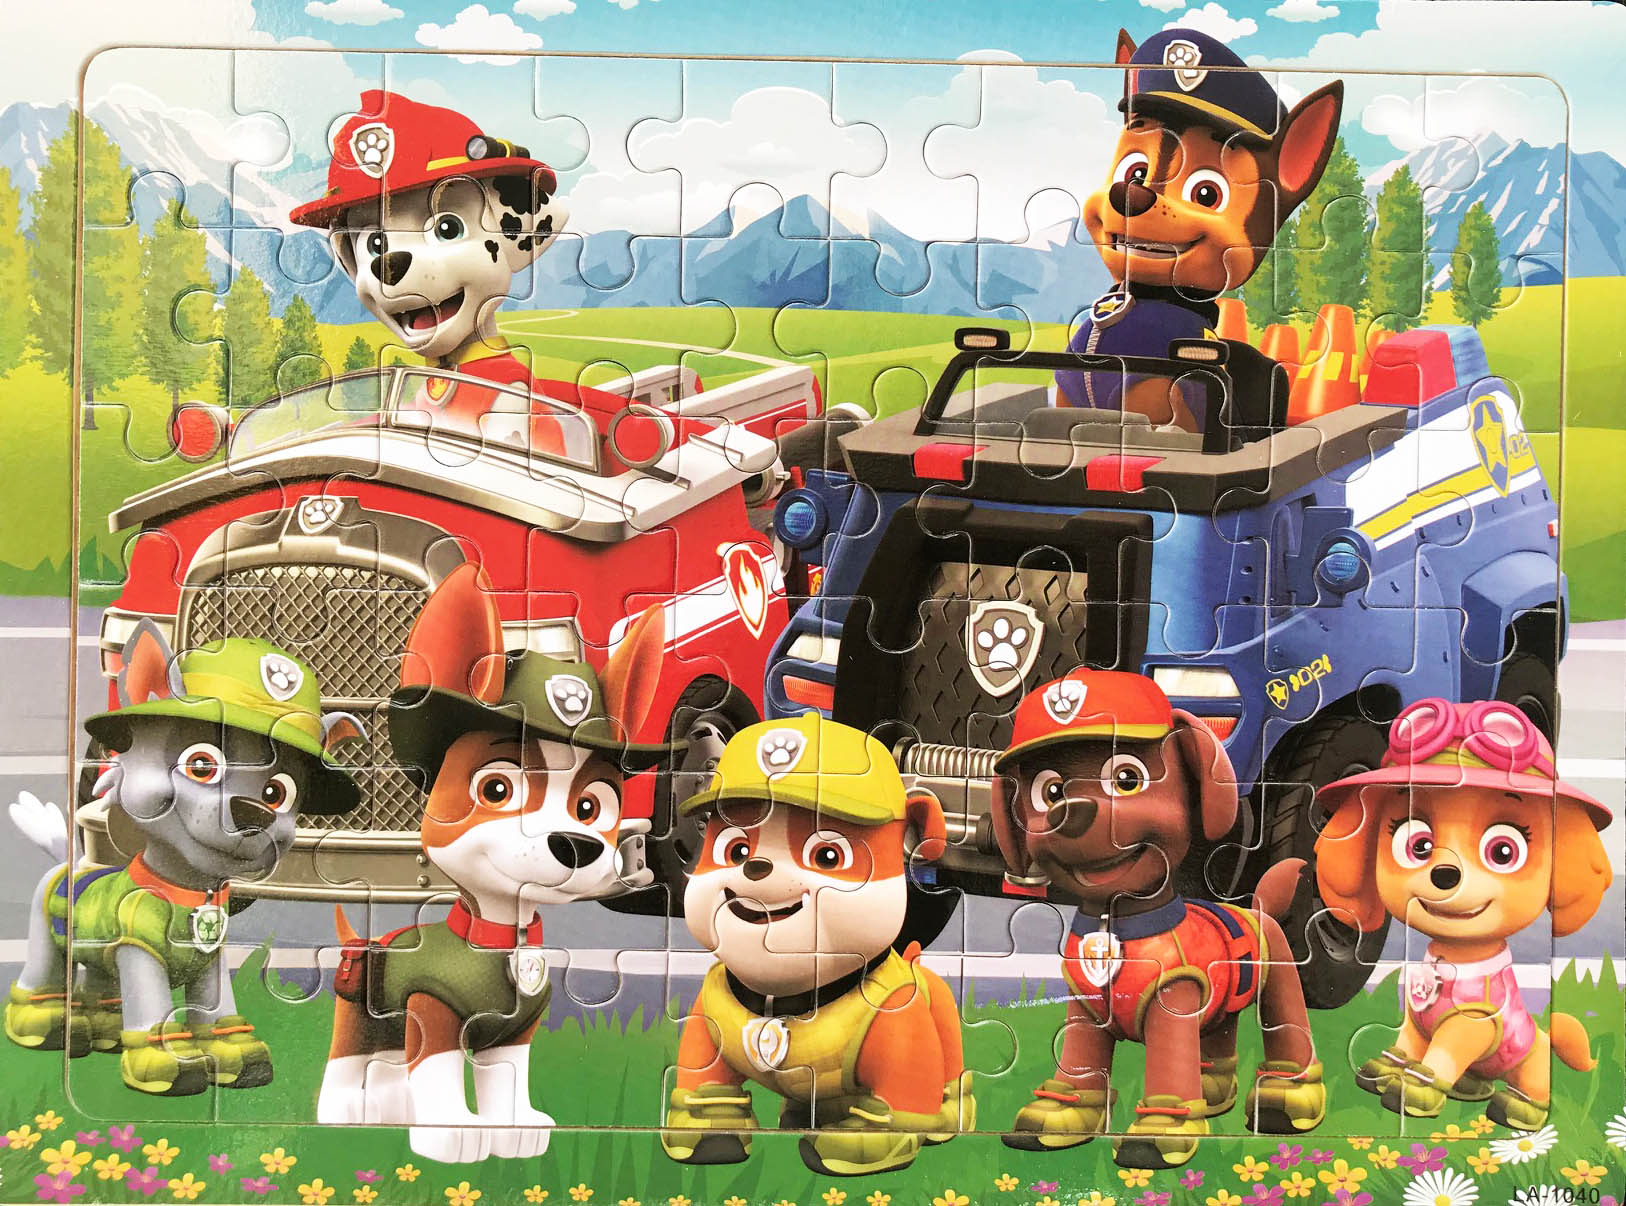 OFFICIAL PAW PATROL WALLPAPER KIDS BEDROOM FEATURE WALL NEW FREE PP  5060322094281  eBay